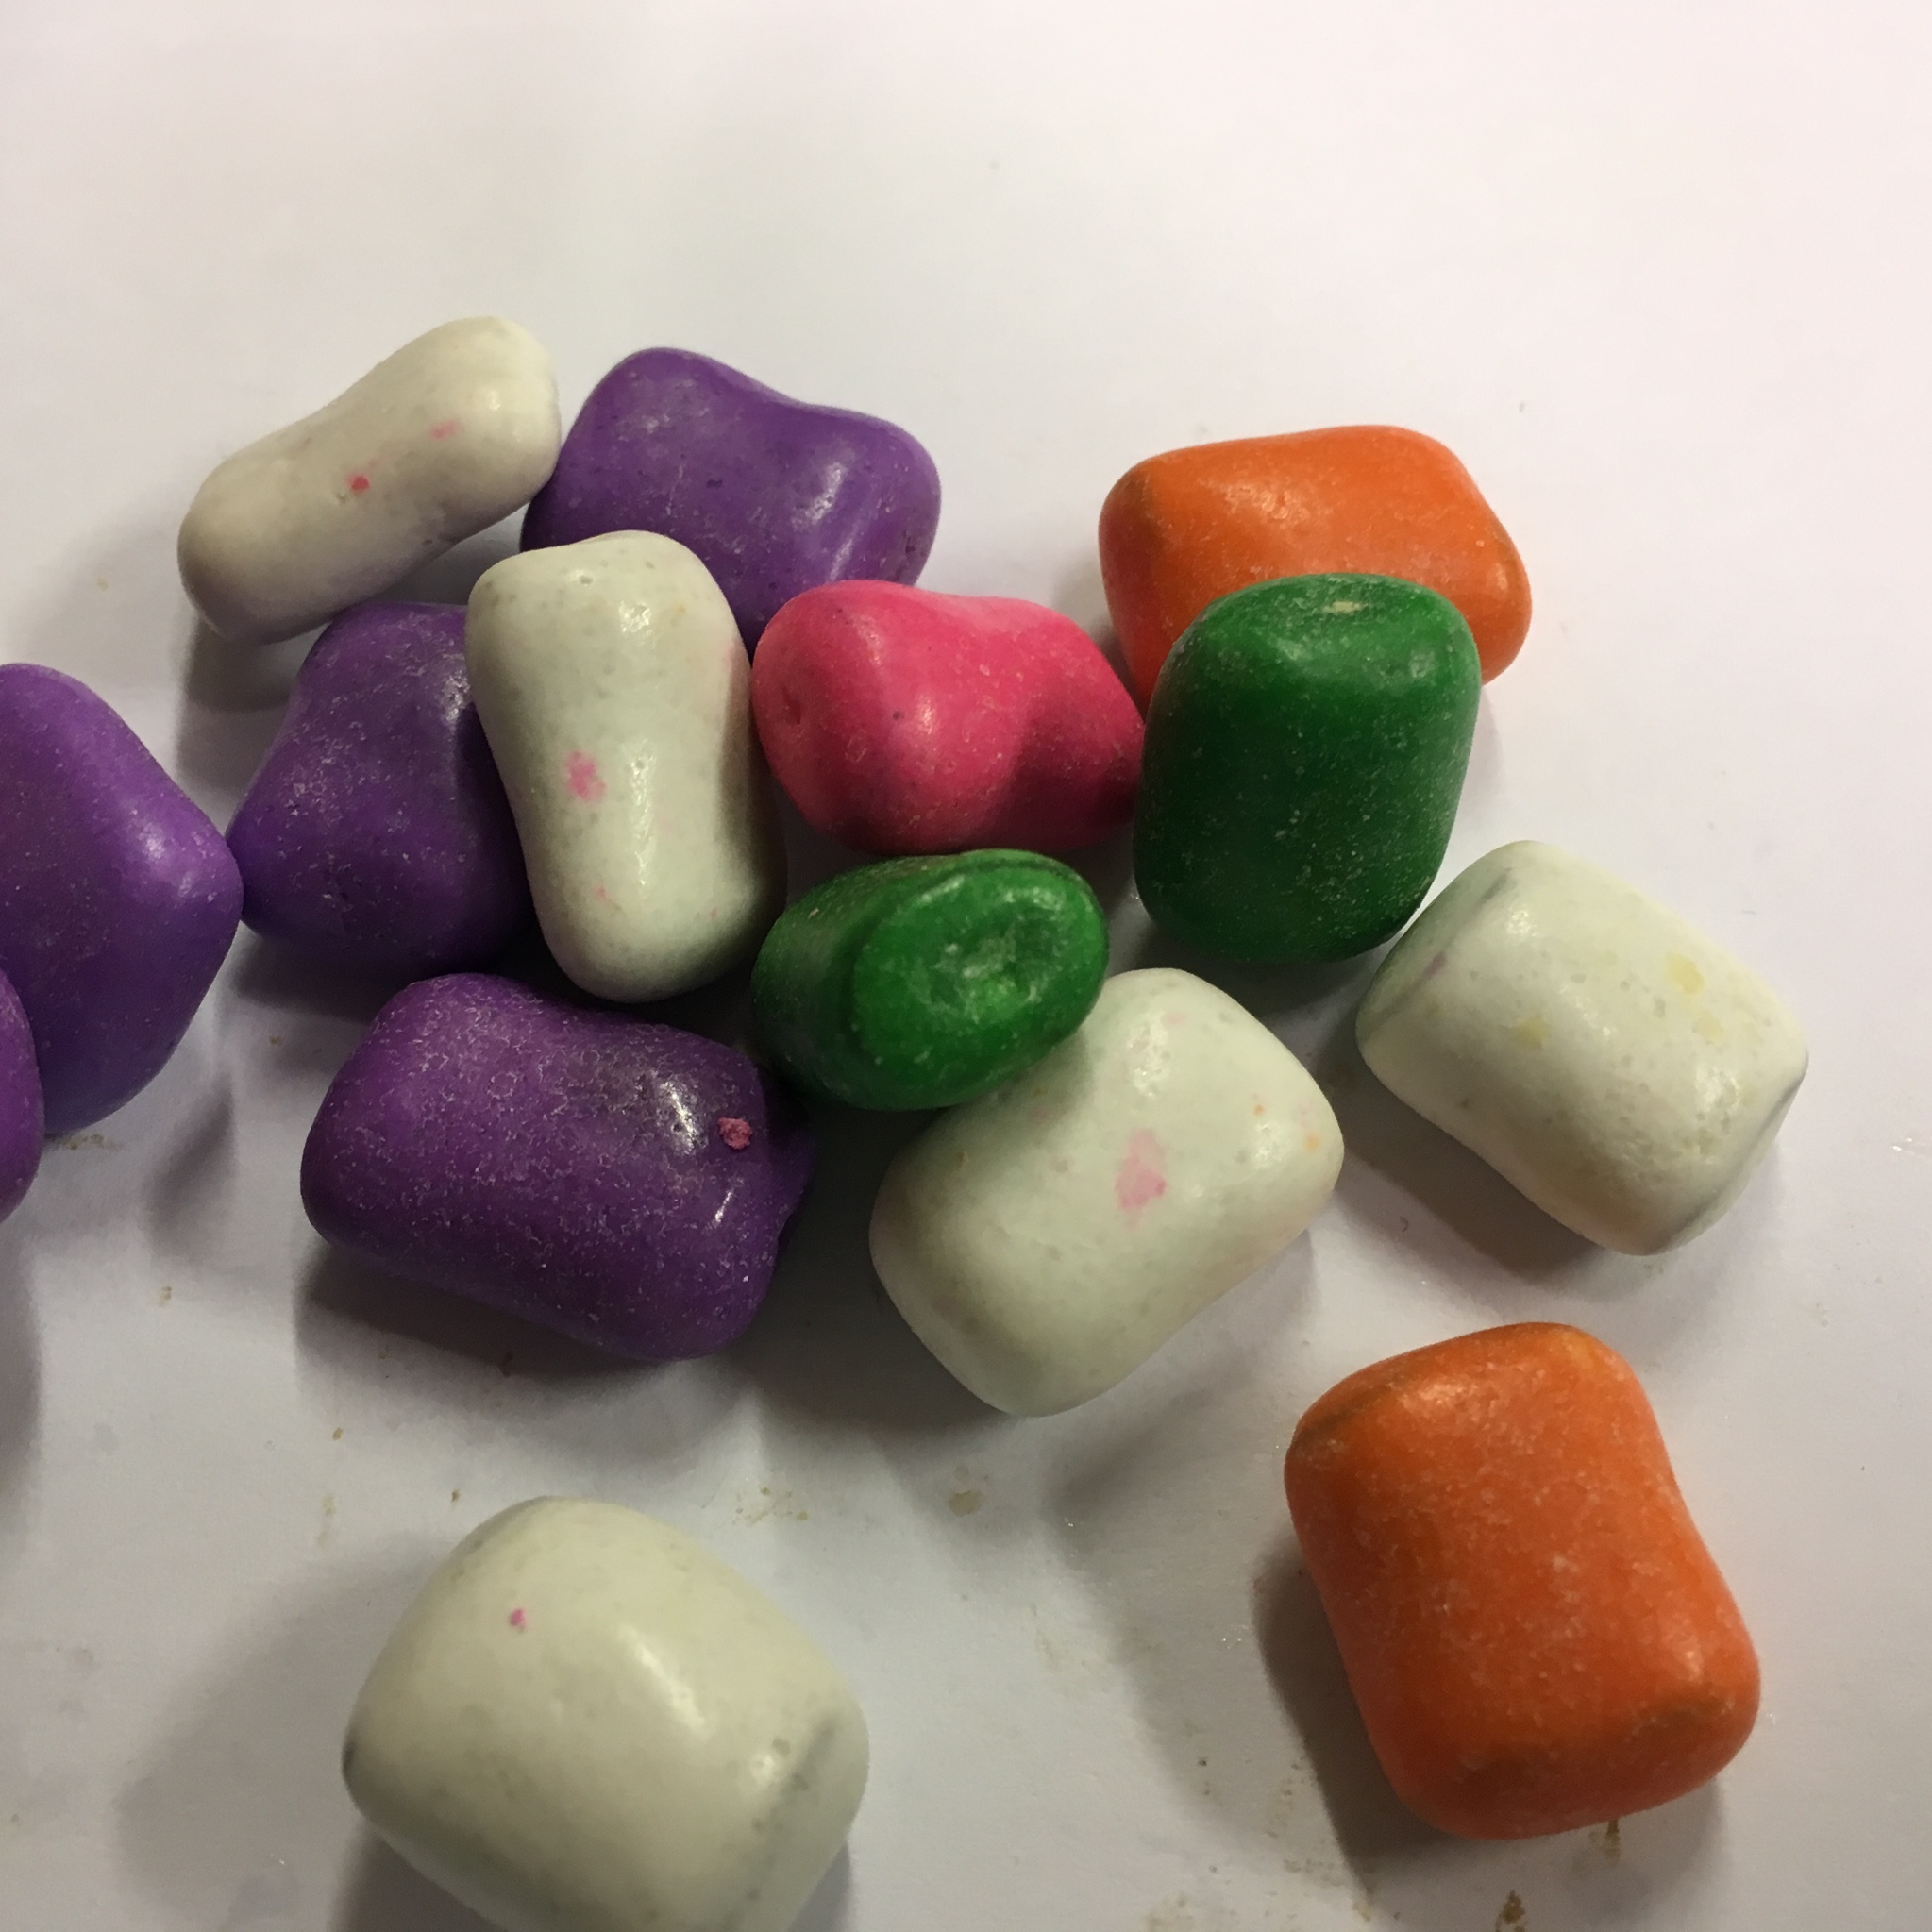 Candy covered licorice